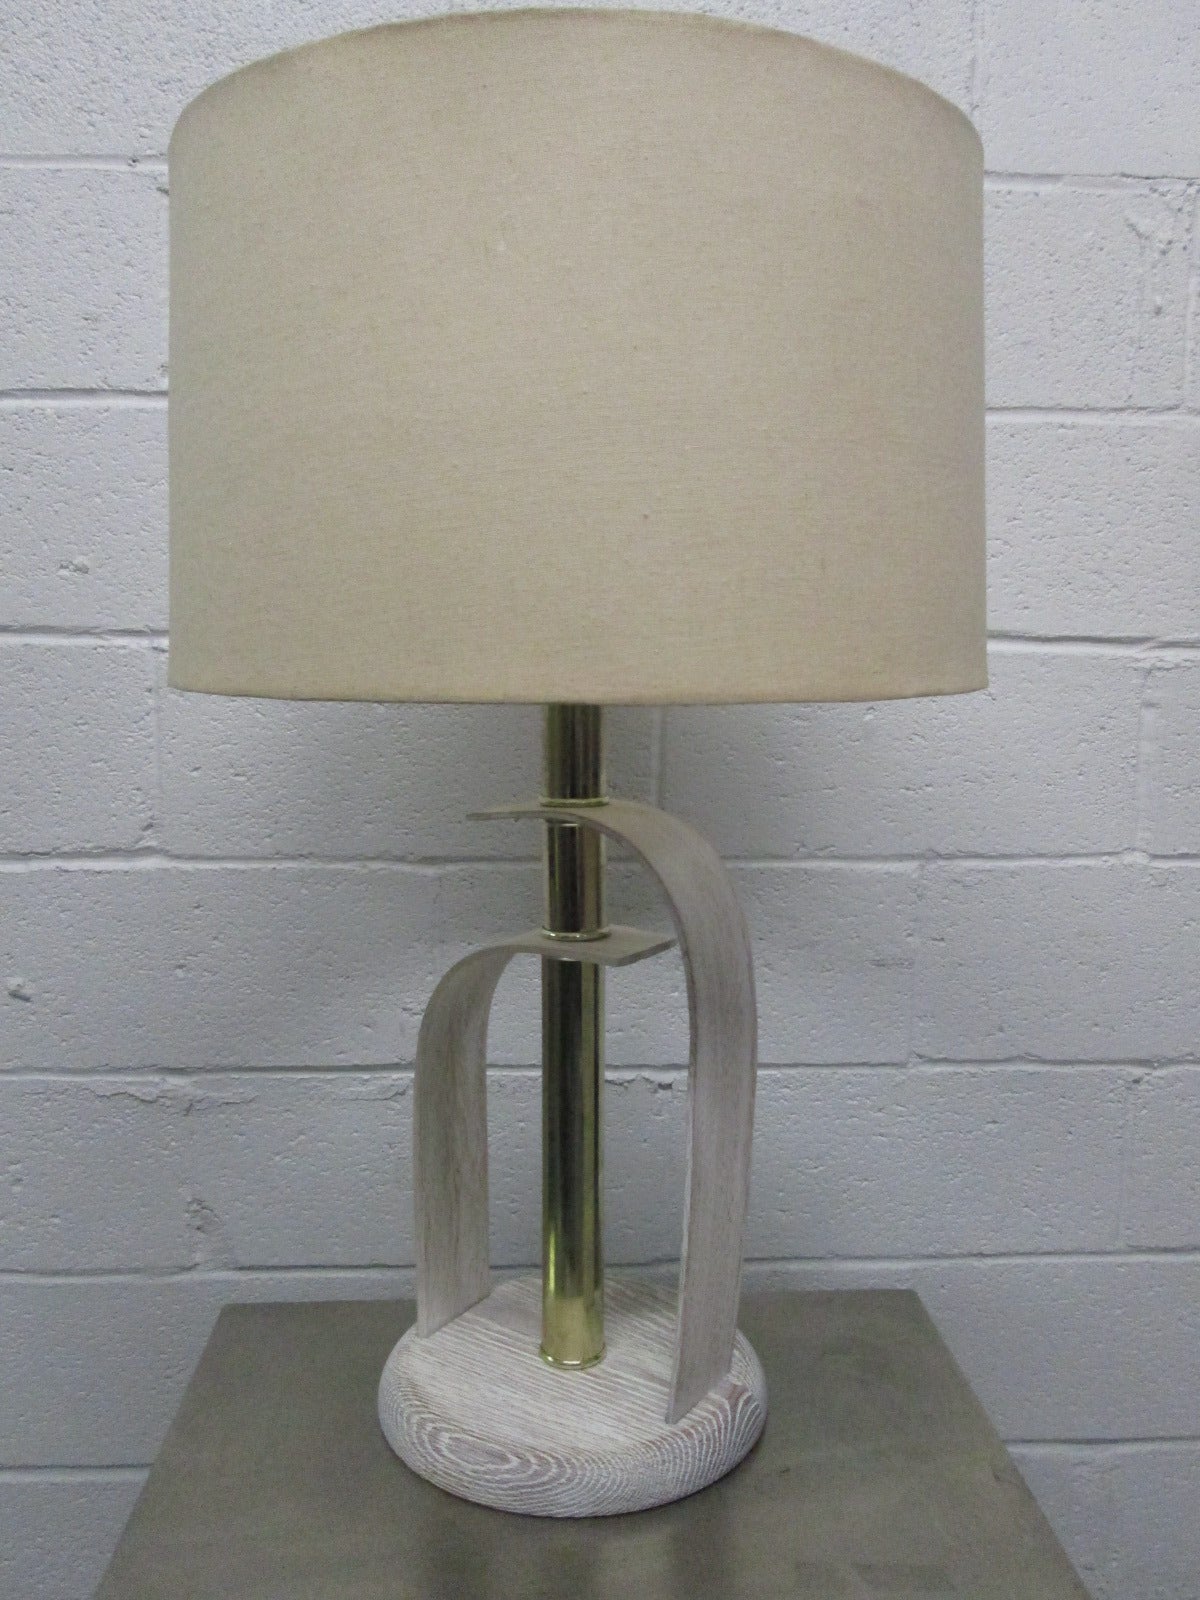 Pair of bentwood Cerused oak lamps. The brass is supported by Cerused bentwood oak.
Measures: 29.5 H. Base is 9.5 in diameter. Under bulb is 19 H.
Shades not included.